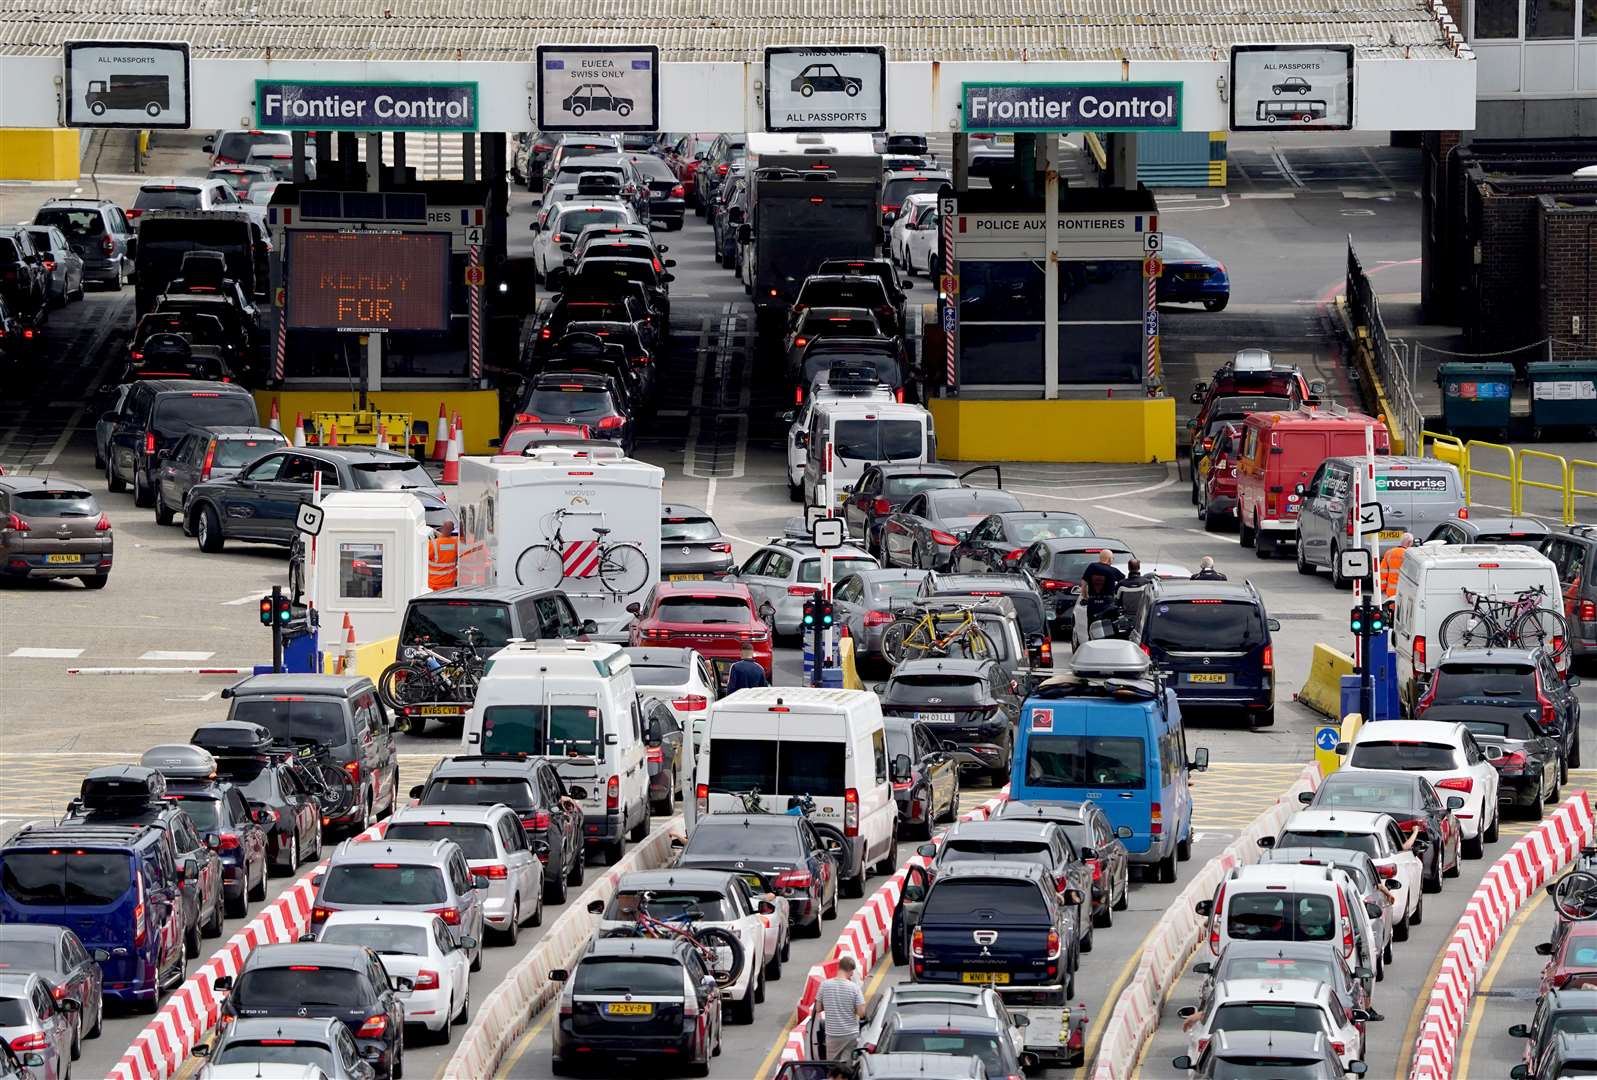 Passengers queue for ferries at the Port of Dover in Kent (Gareth Fuller/PA)